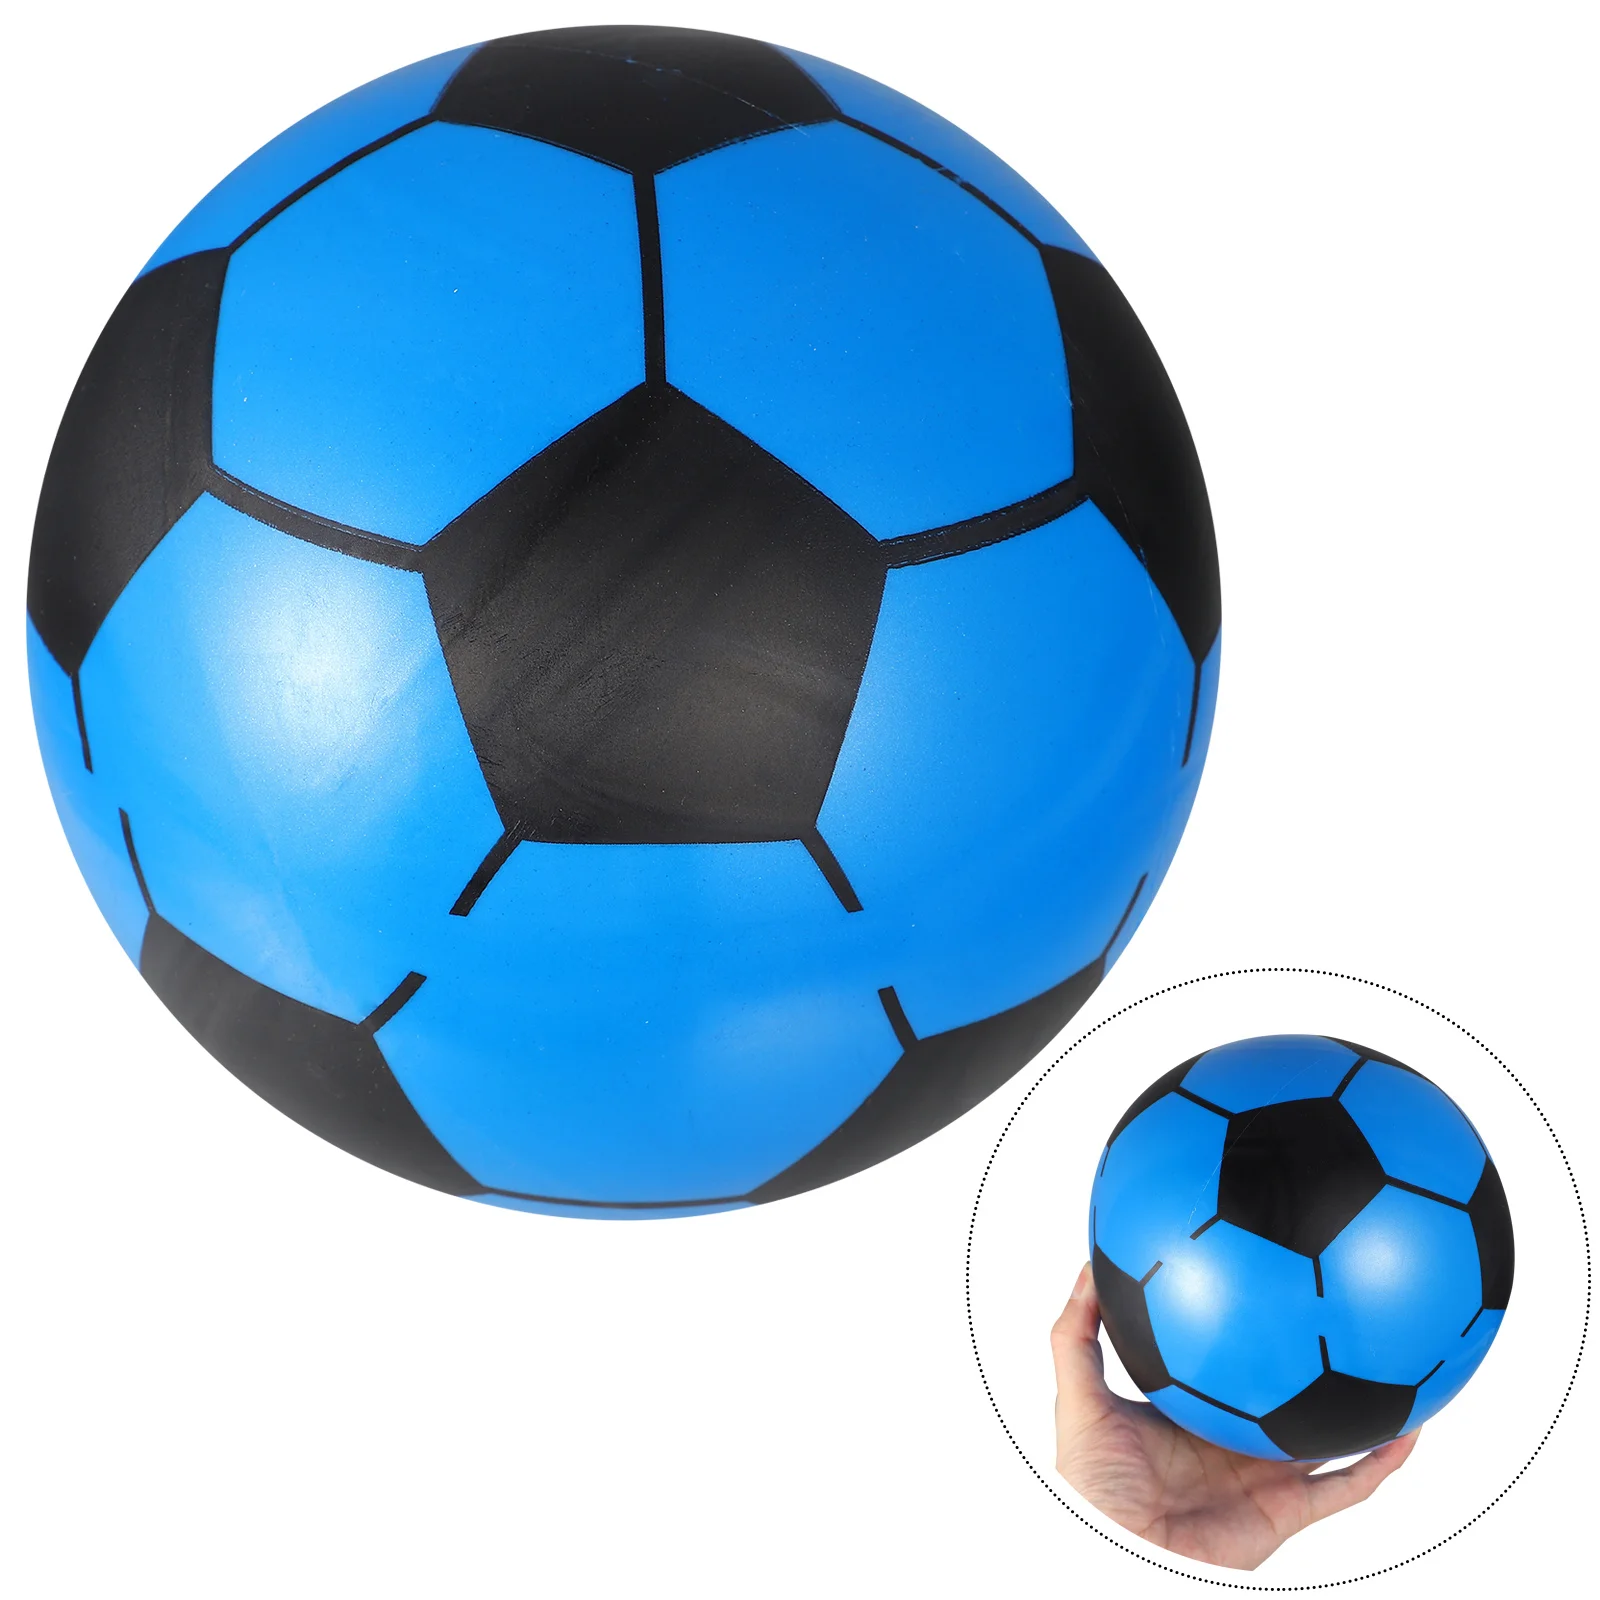 20cm Inflatable Soccer Ball Toy Football Water Balloon Swimming Pool Out... - $13.88